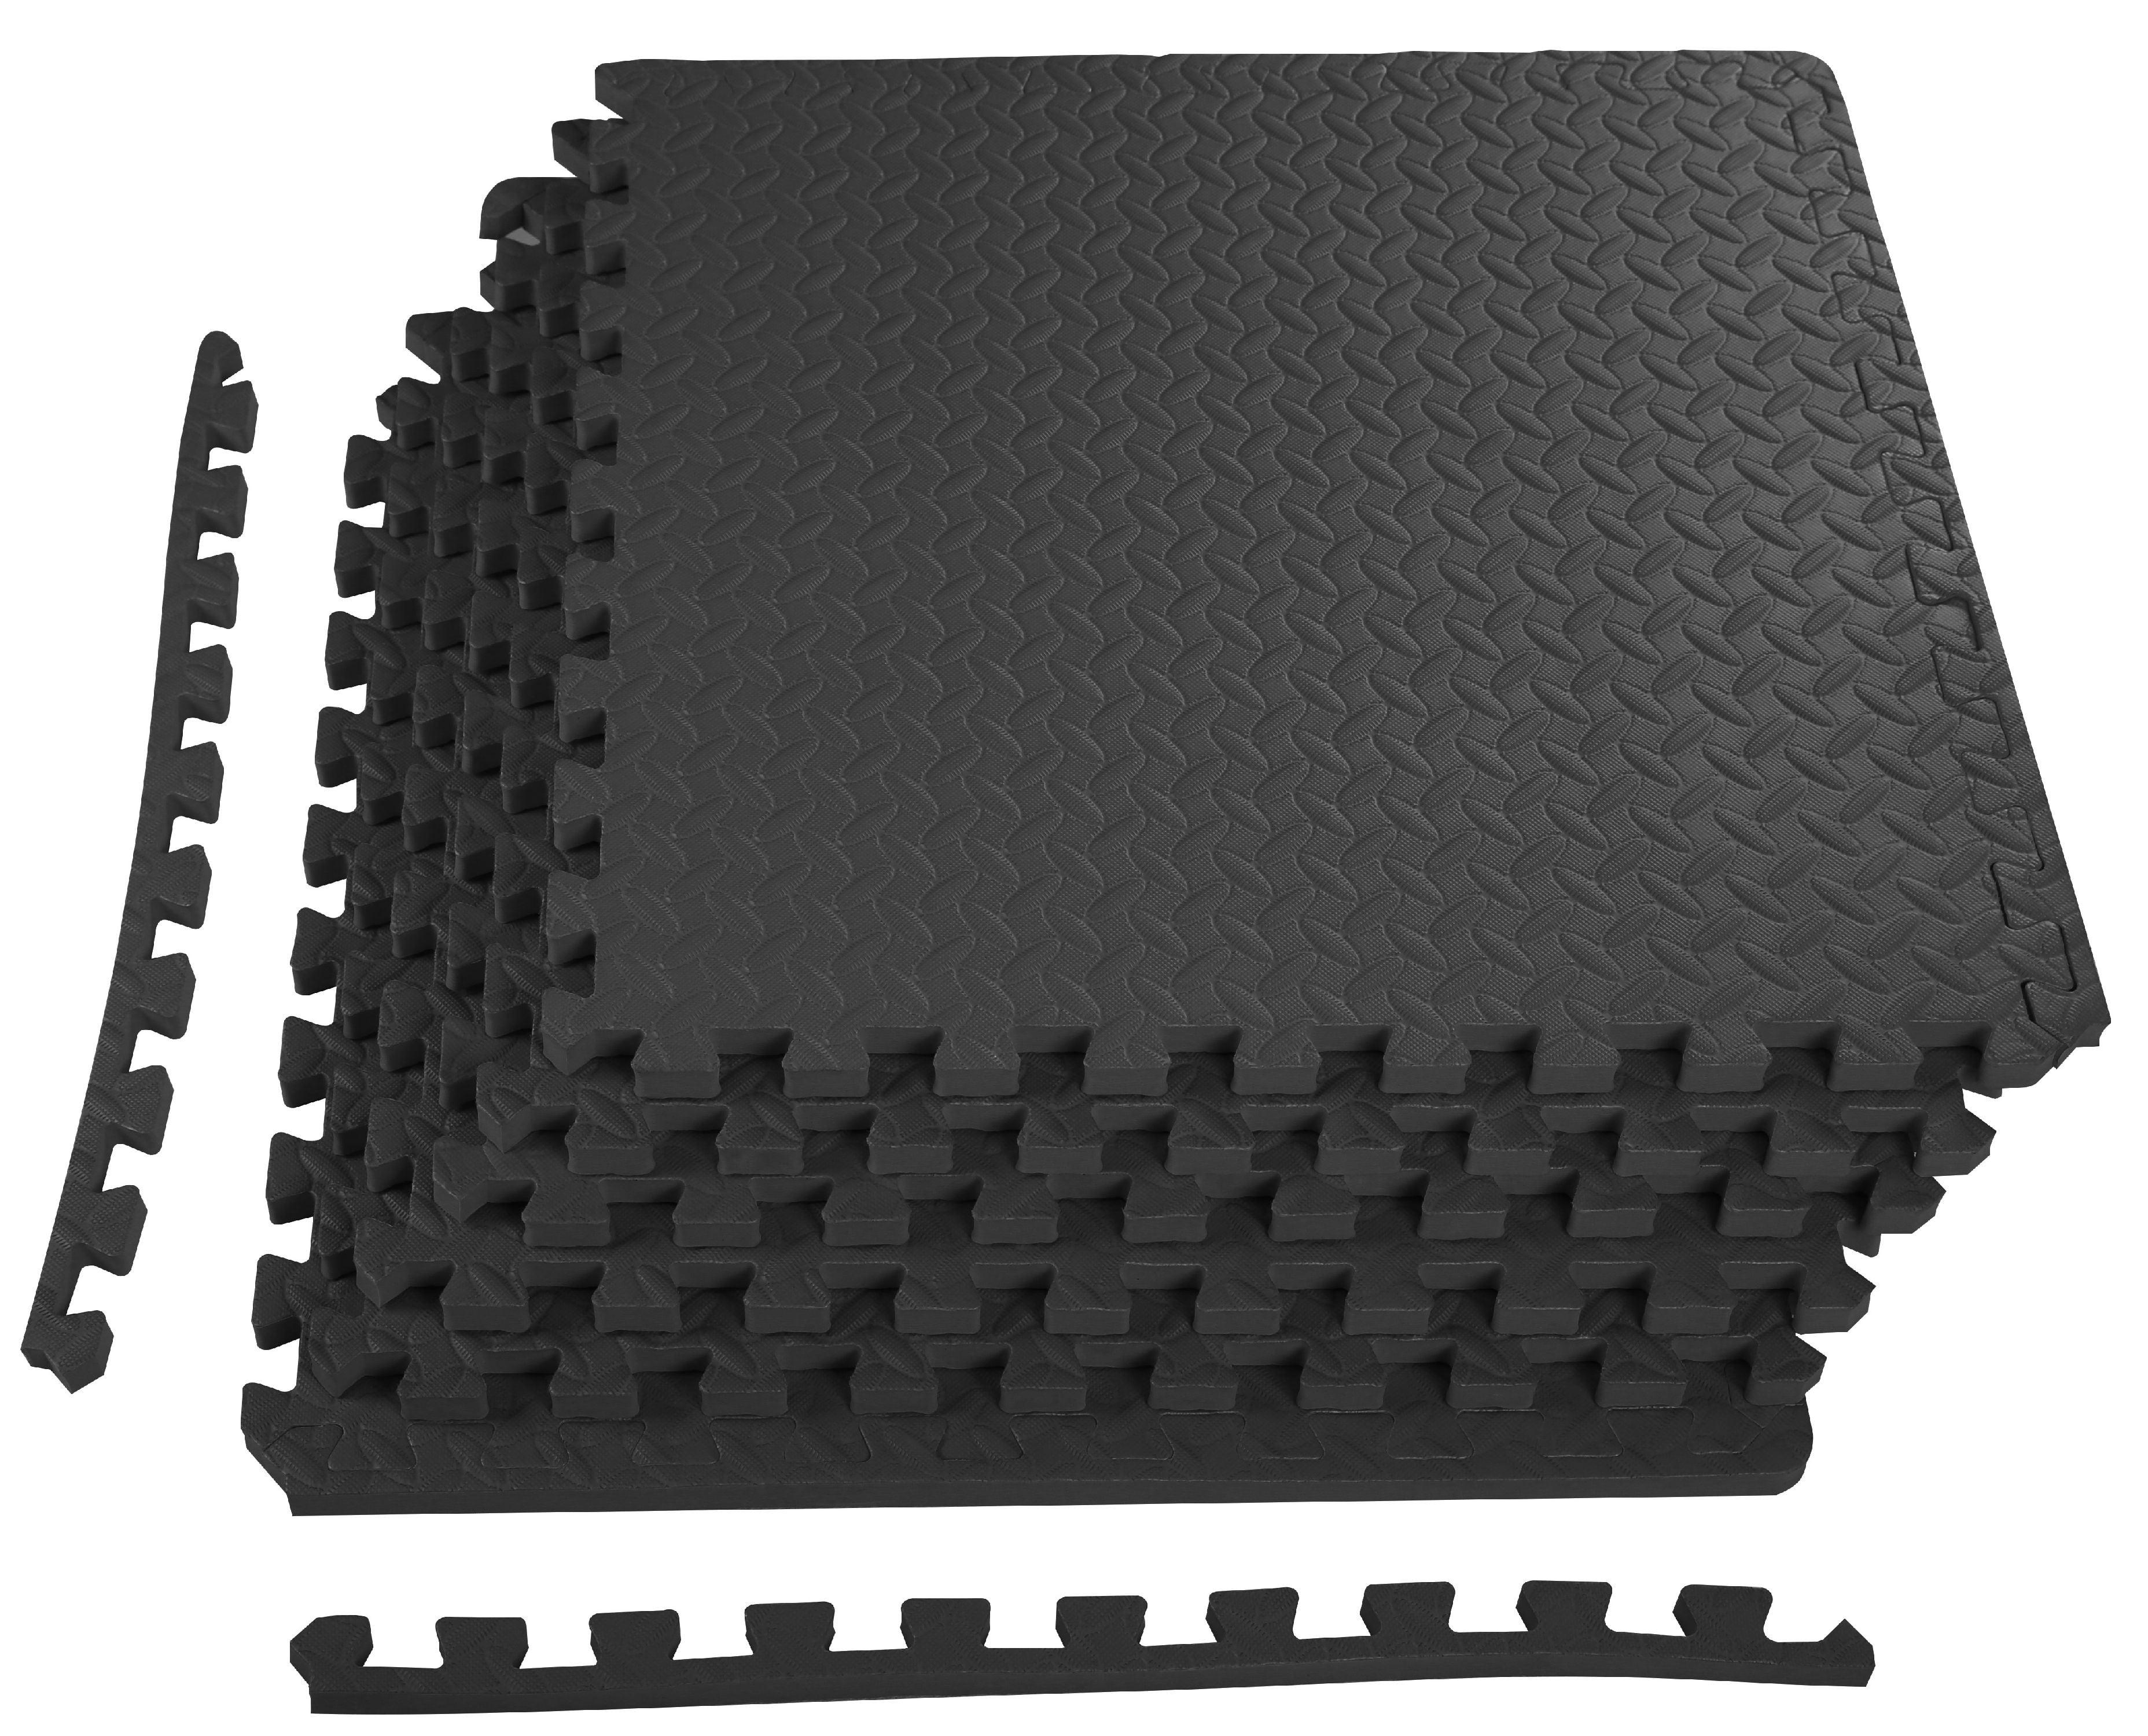 Thick Puzzle Mats on Sale, 57% OFF | www.vetyvet.com